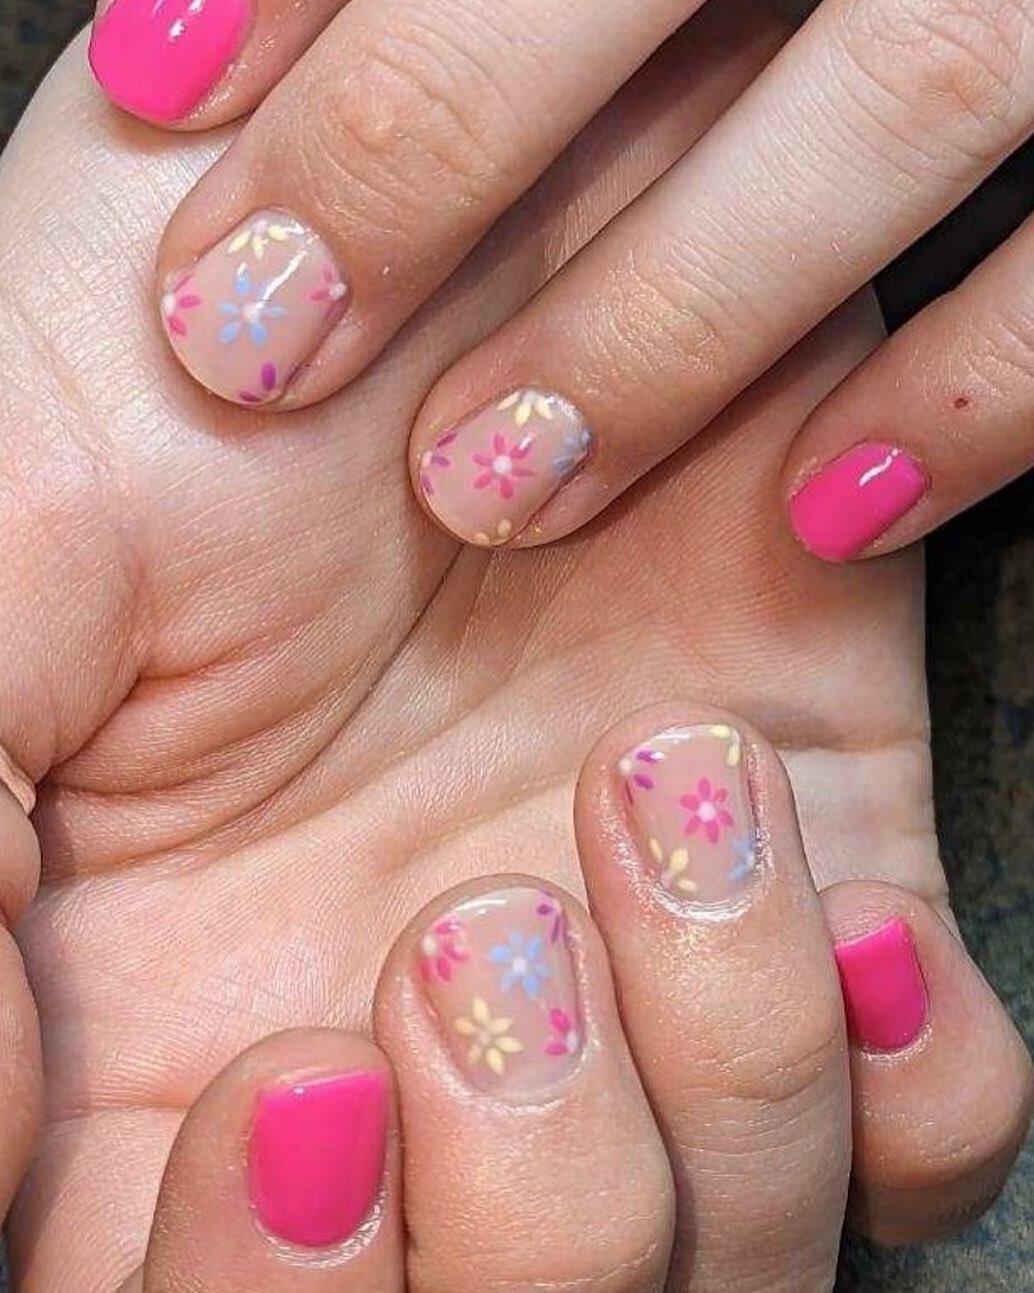 Don&rsquo;t underestimate the power of flowers on your nails! 🌸

Give us a call at 915-833-4050 to schedule your appointment with our fabulous nail tech Jennifer. 💅🏻

#nailart #springnails #opi #elpasosalon #westendhaircompanyanddayspa #elpasonail